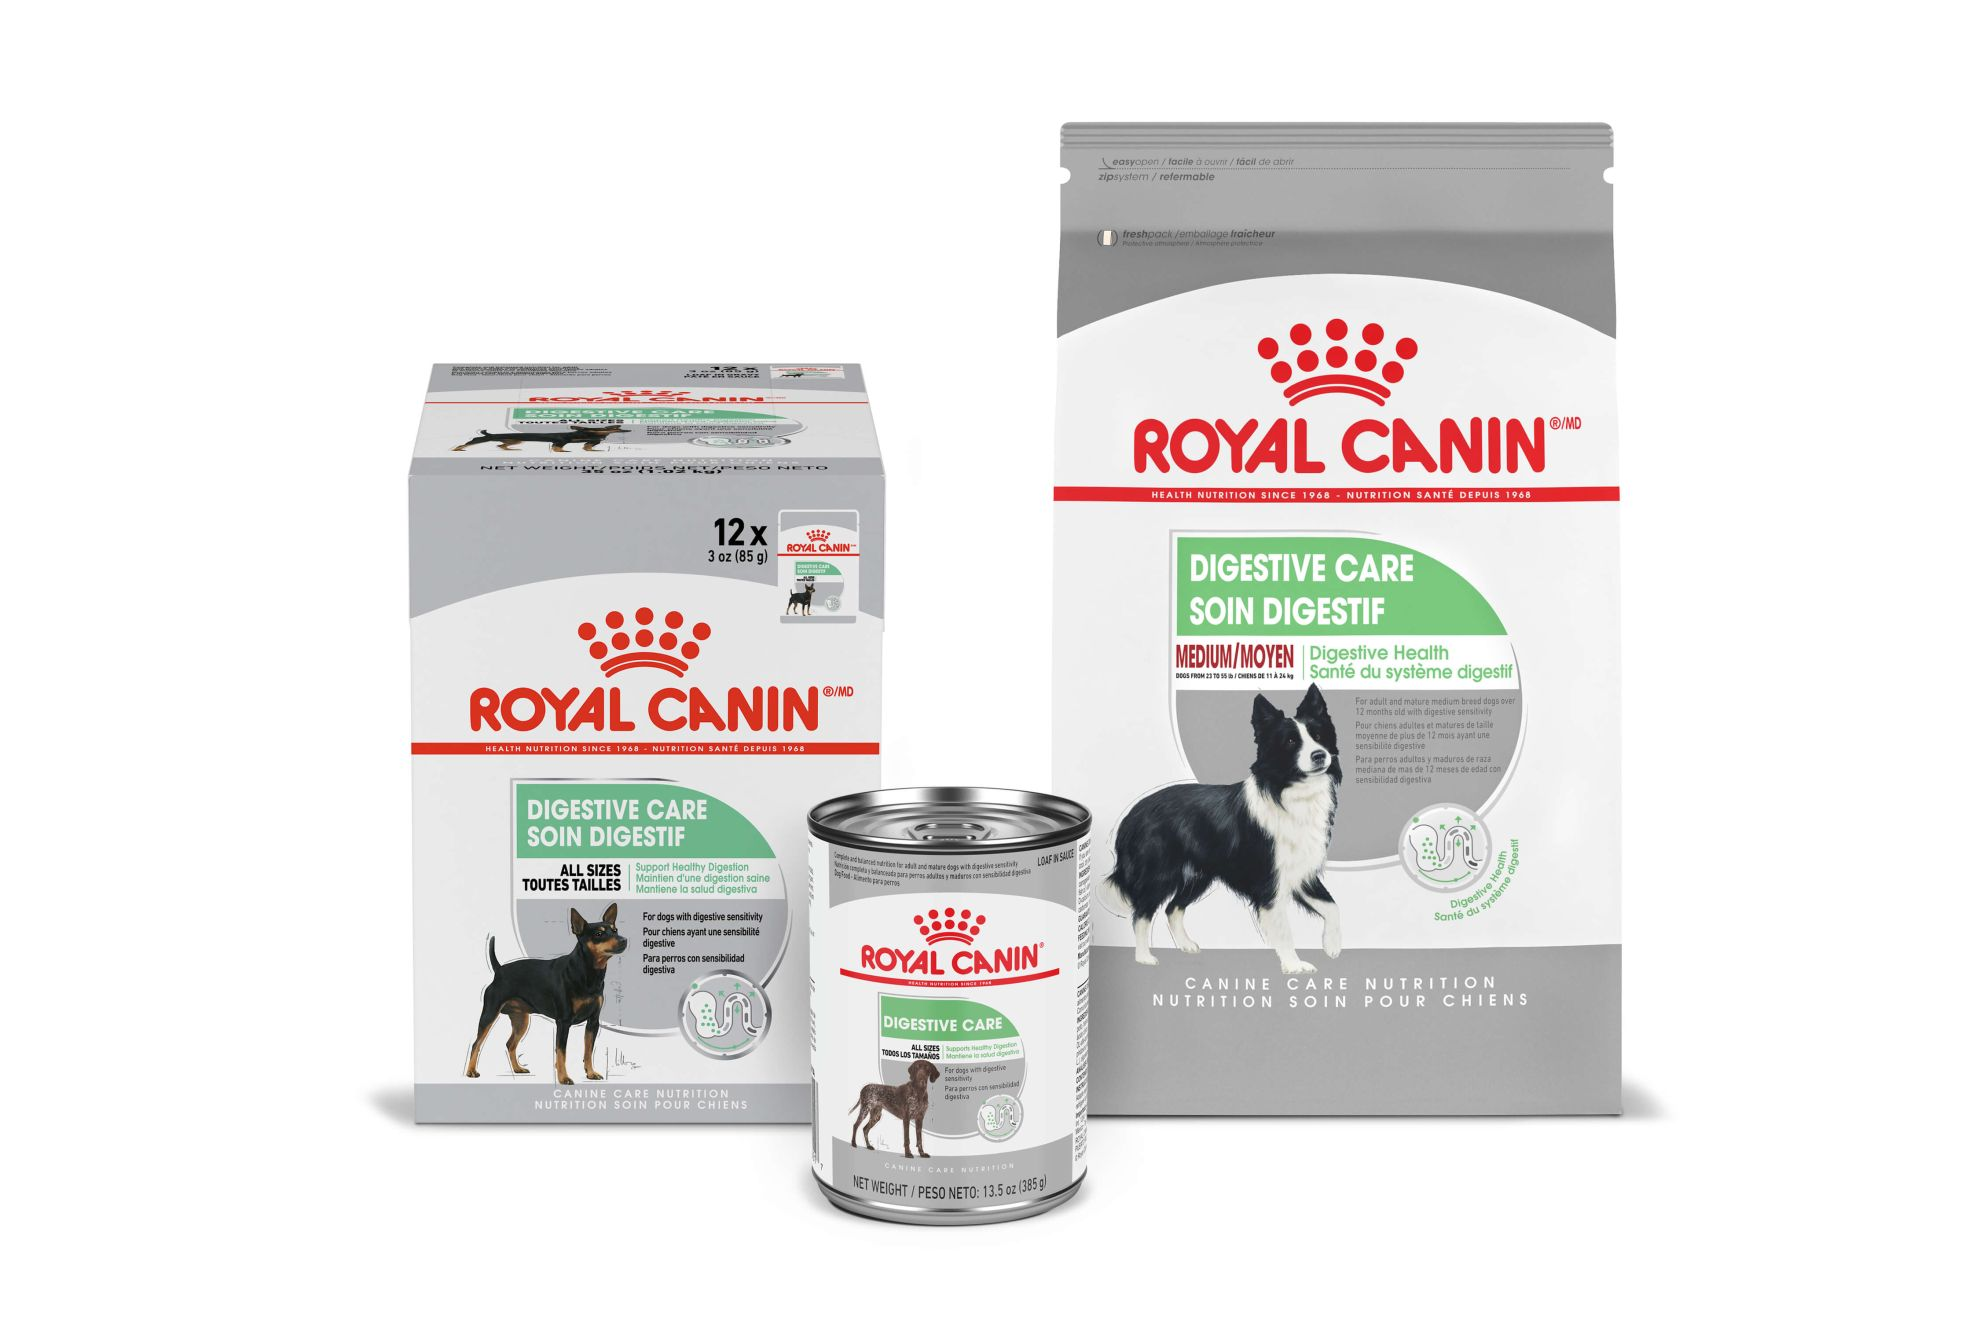 Royal Canin Digestive Care Range of Products